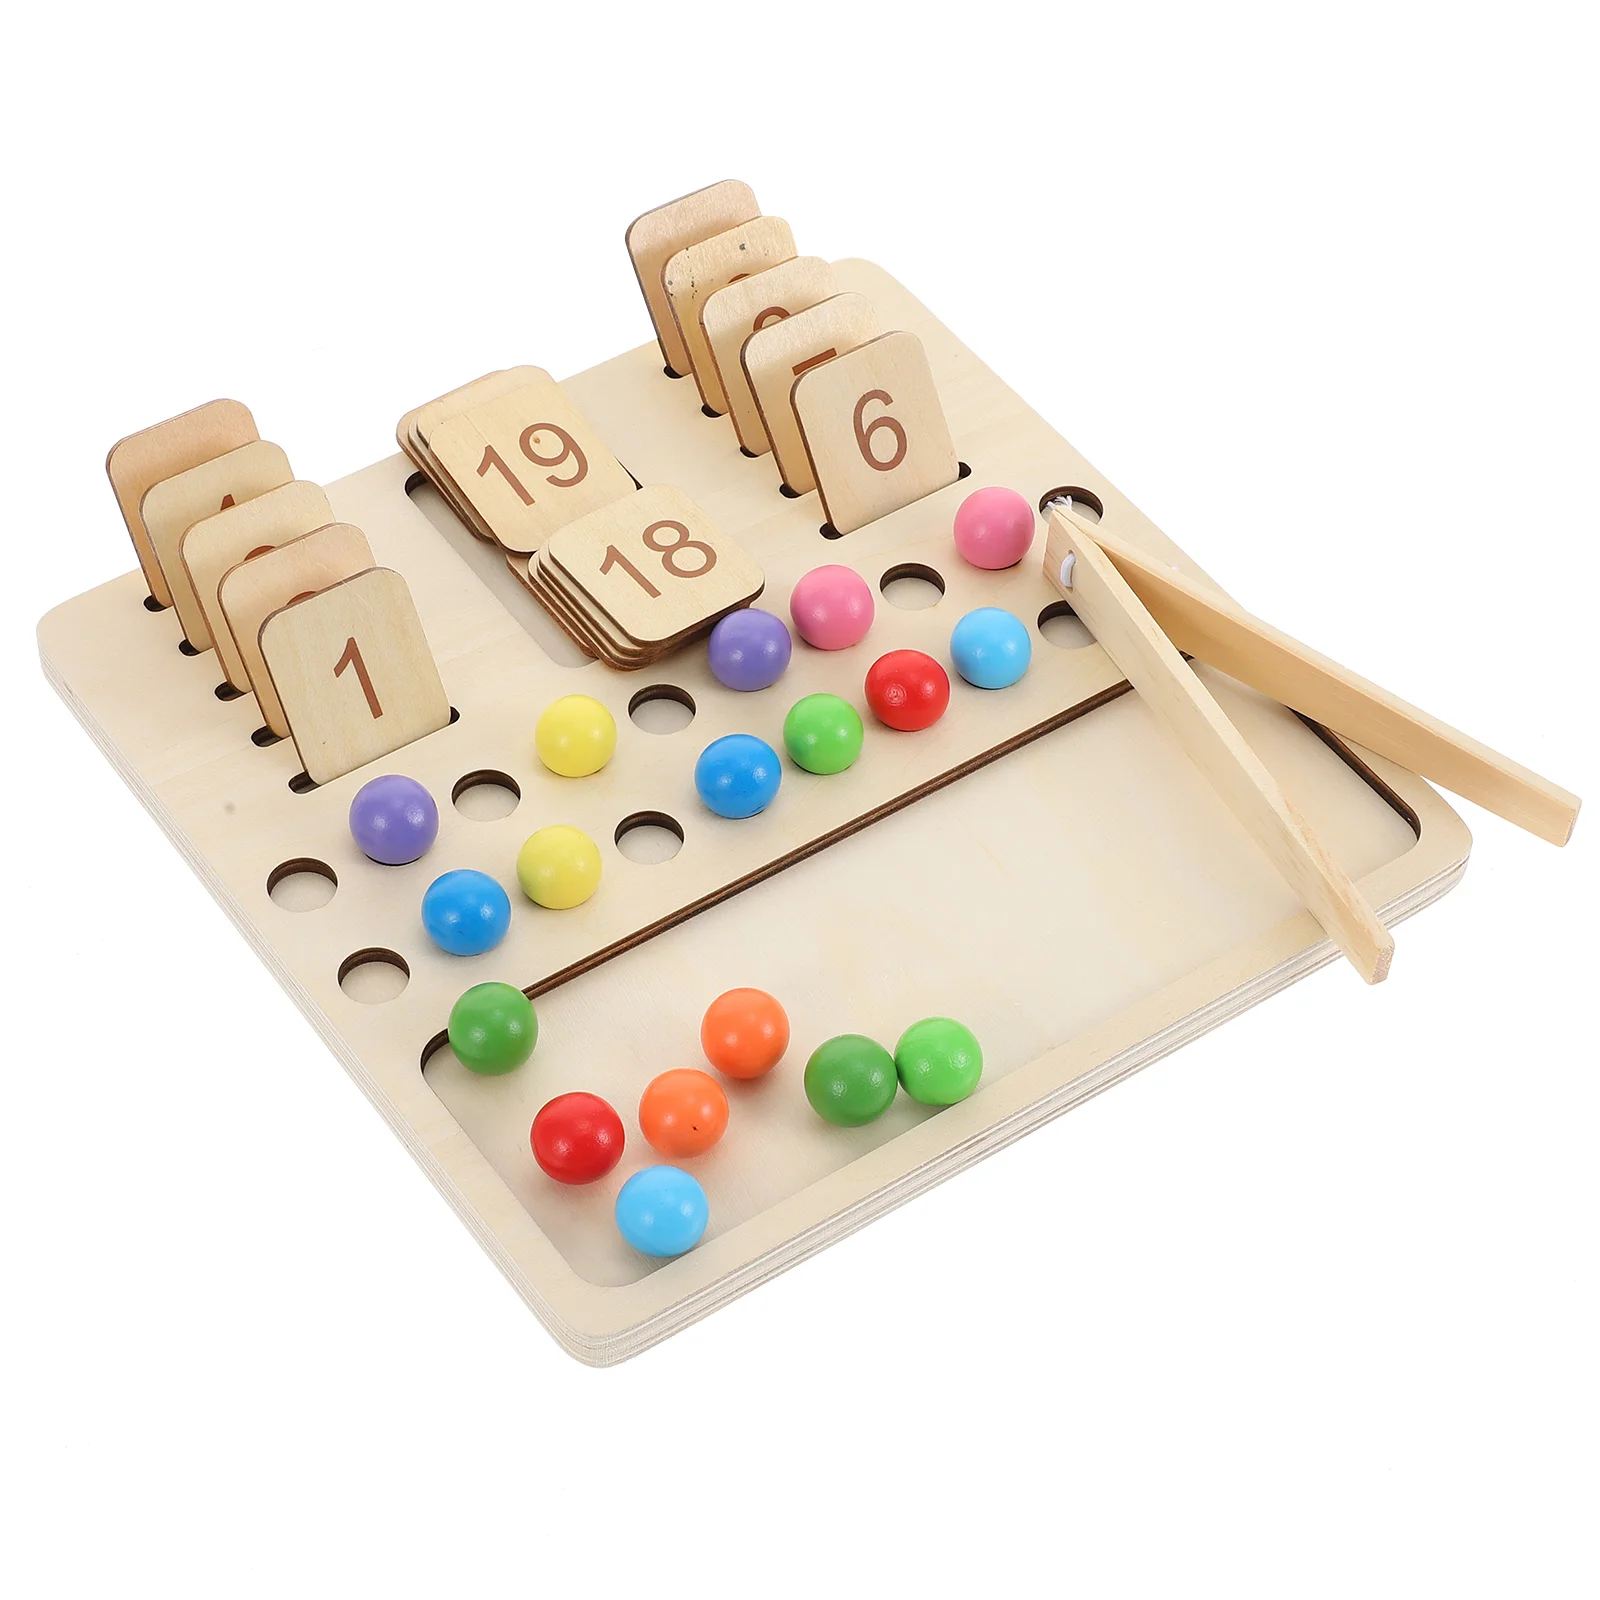 Digital Cognitive Board Toys Wooden Educational Teaching Supplies Playthings Aids Arithmetic Boards Math Learning montessori binomial cube wooden math toys children early educational equipment preschool teaching aids kids sensorial materials